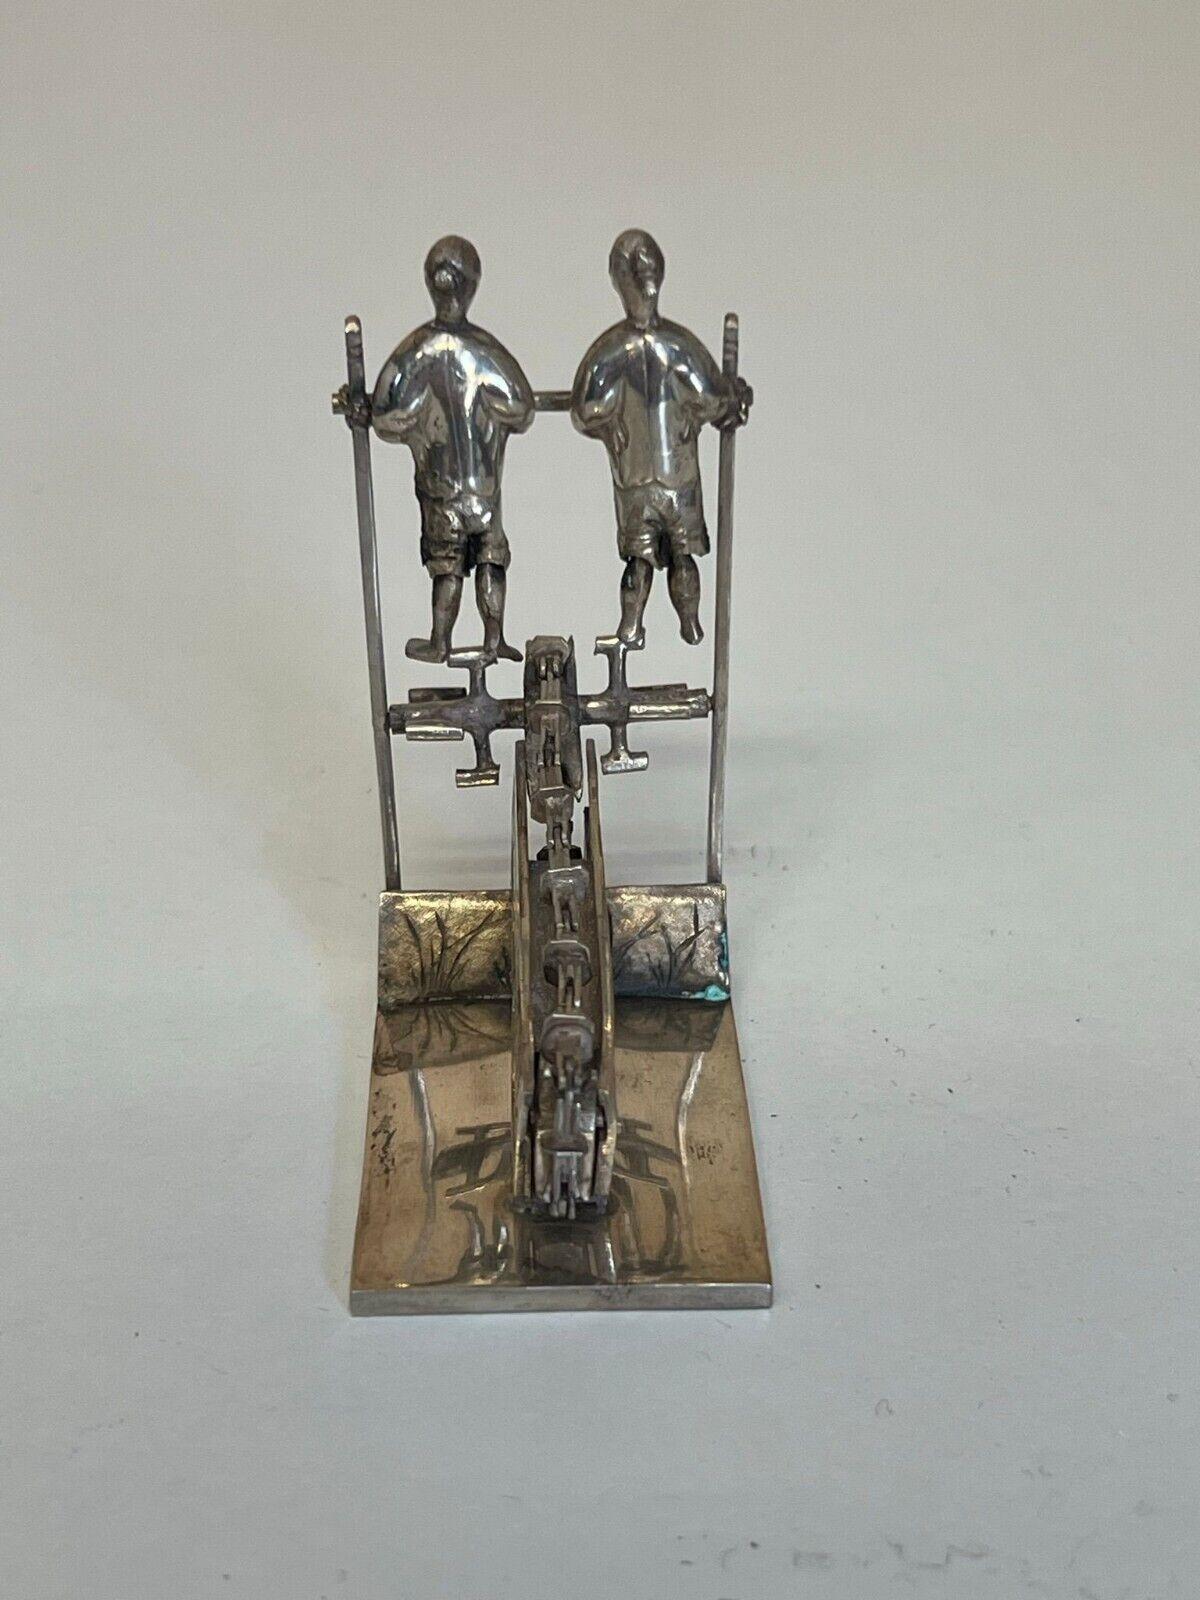 ANTIQUE CIRCA 1890 CHINESE STERLiNG SILVER STATUE OF MEN PEDDLING WITH A CHAIN For Sale 6